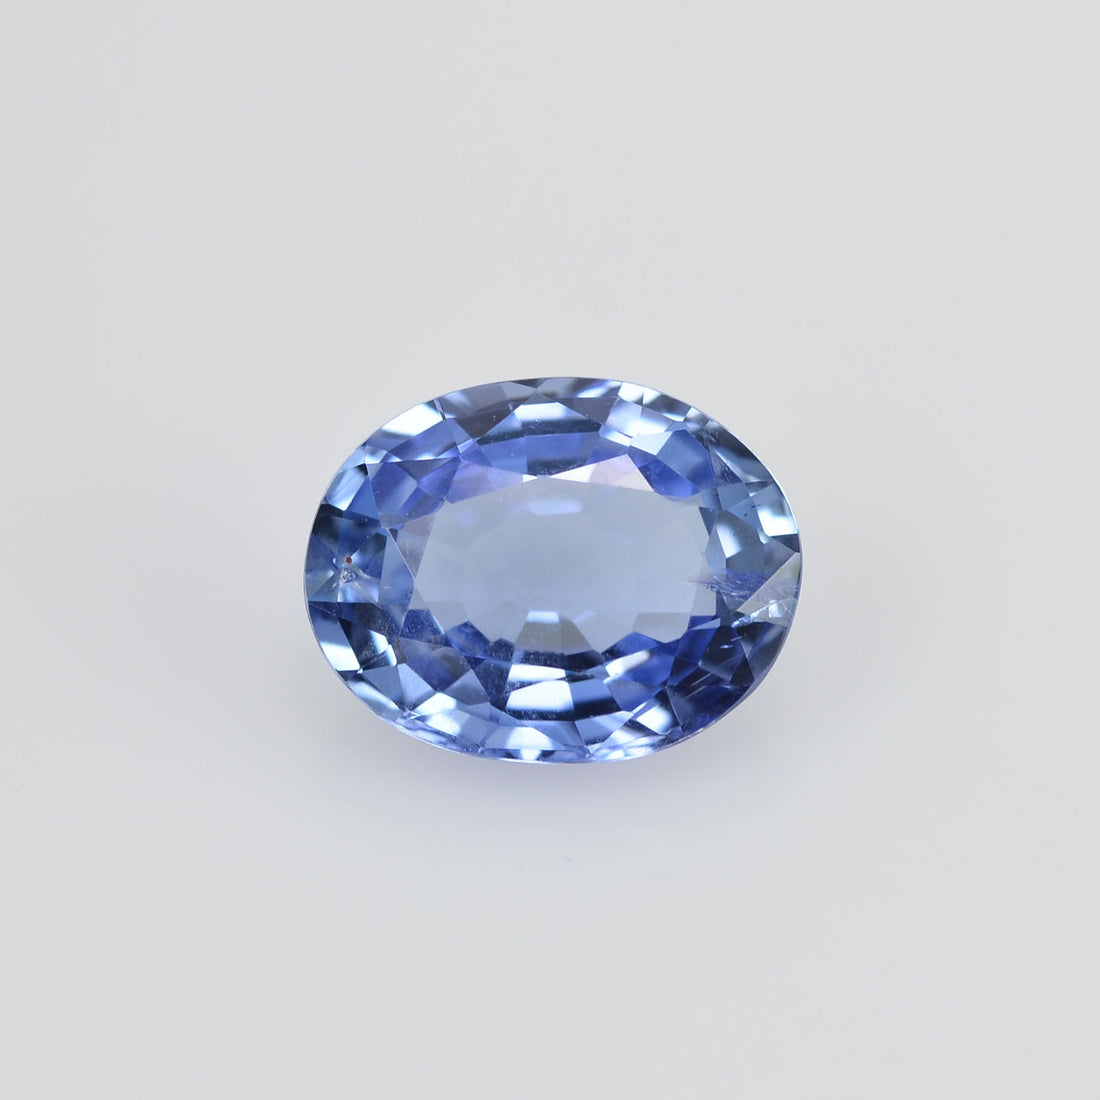 1.27 cts Unheated Natural Blue Sapphire Loose Gemstone Oval Cut Certified